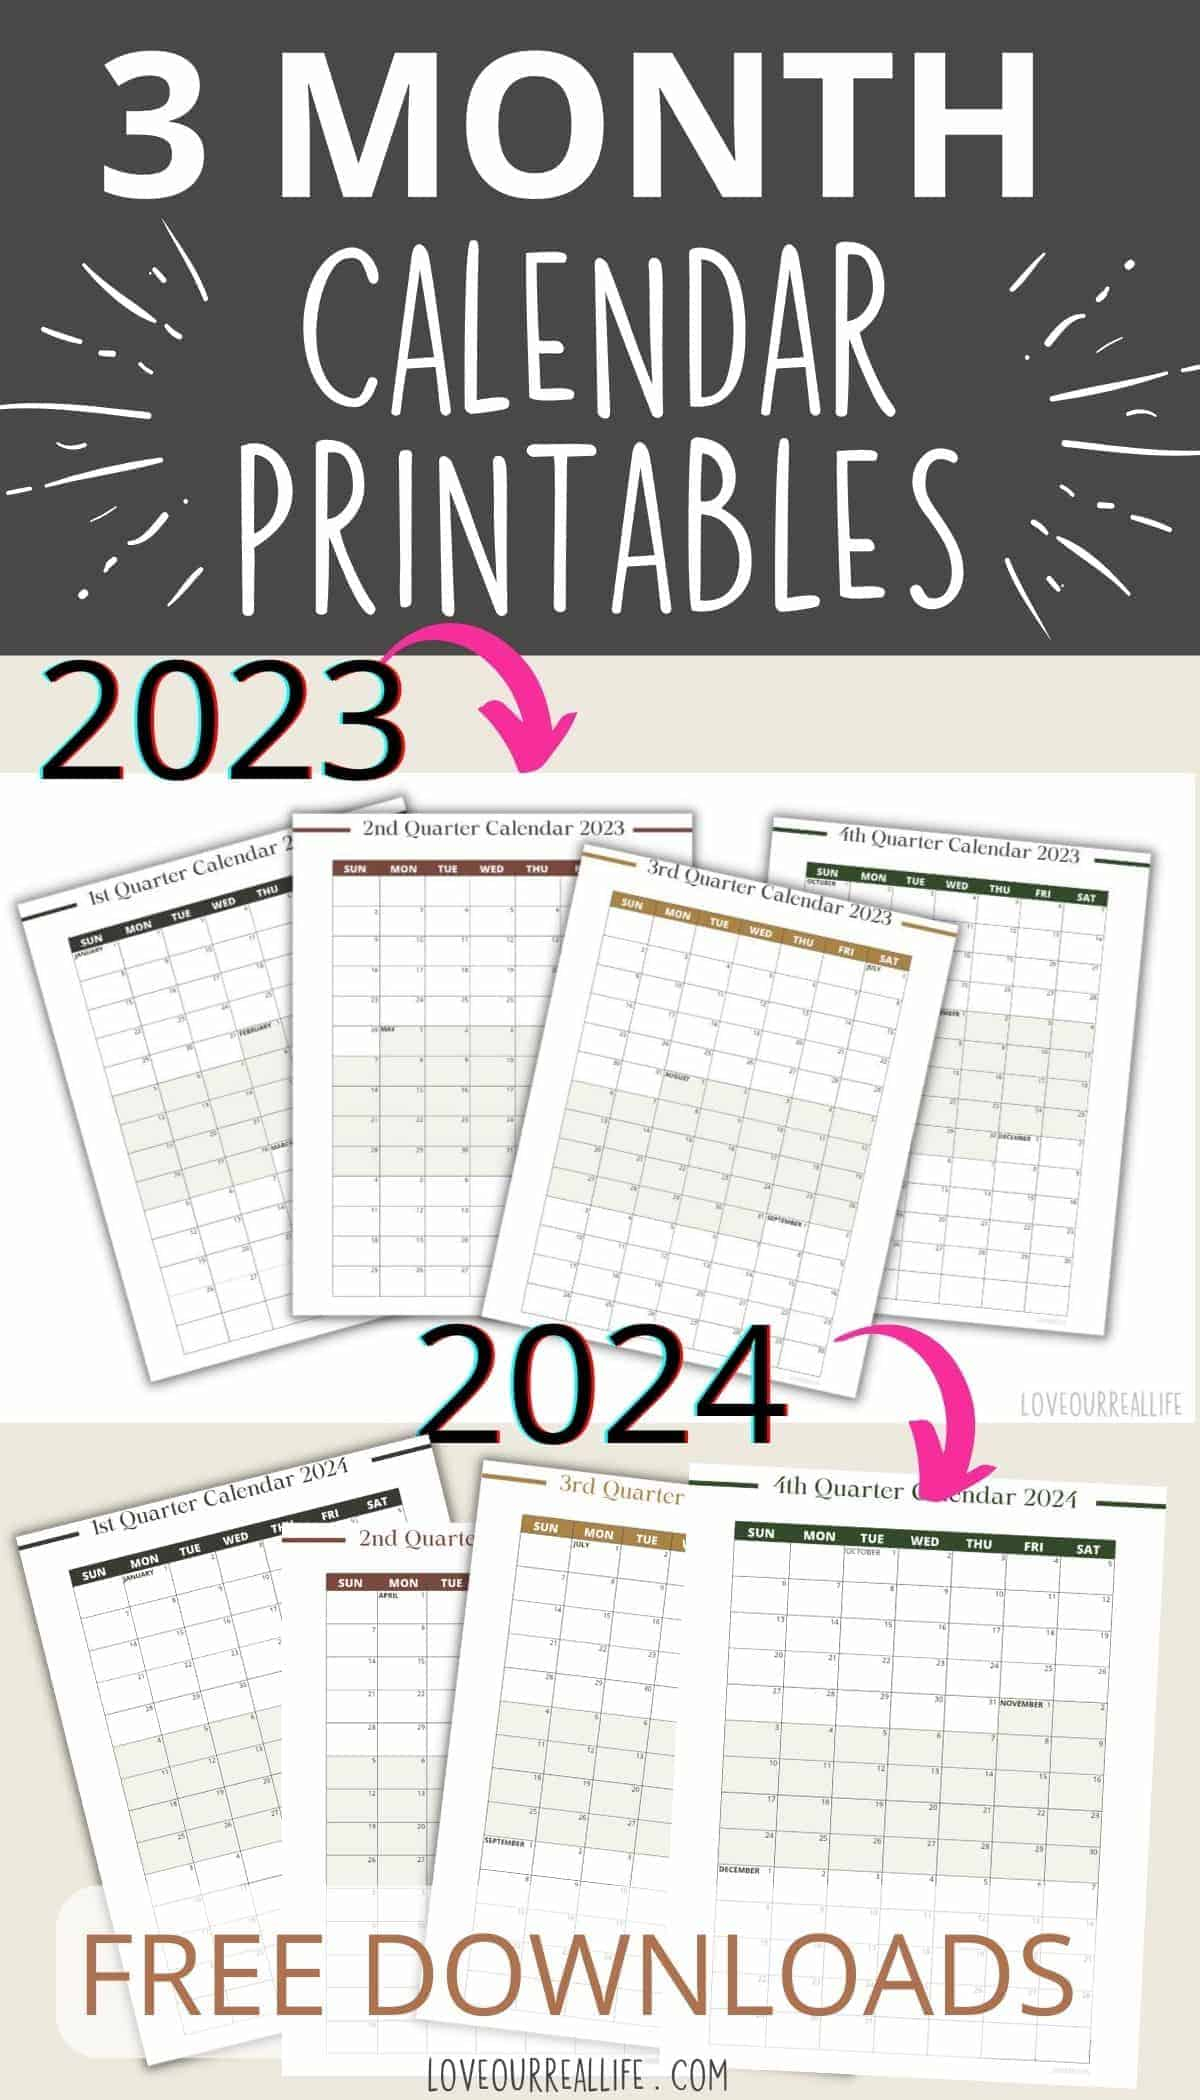 3 Month Calendar Printables: 2023 And 2024 ⋆ Love Our Real Life for 2024 3 Month Calendar Printable